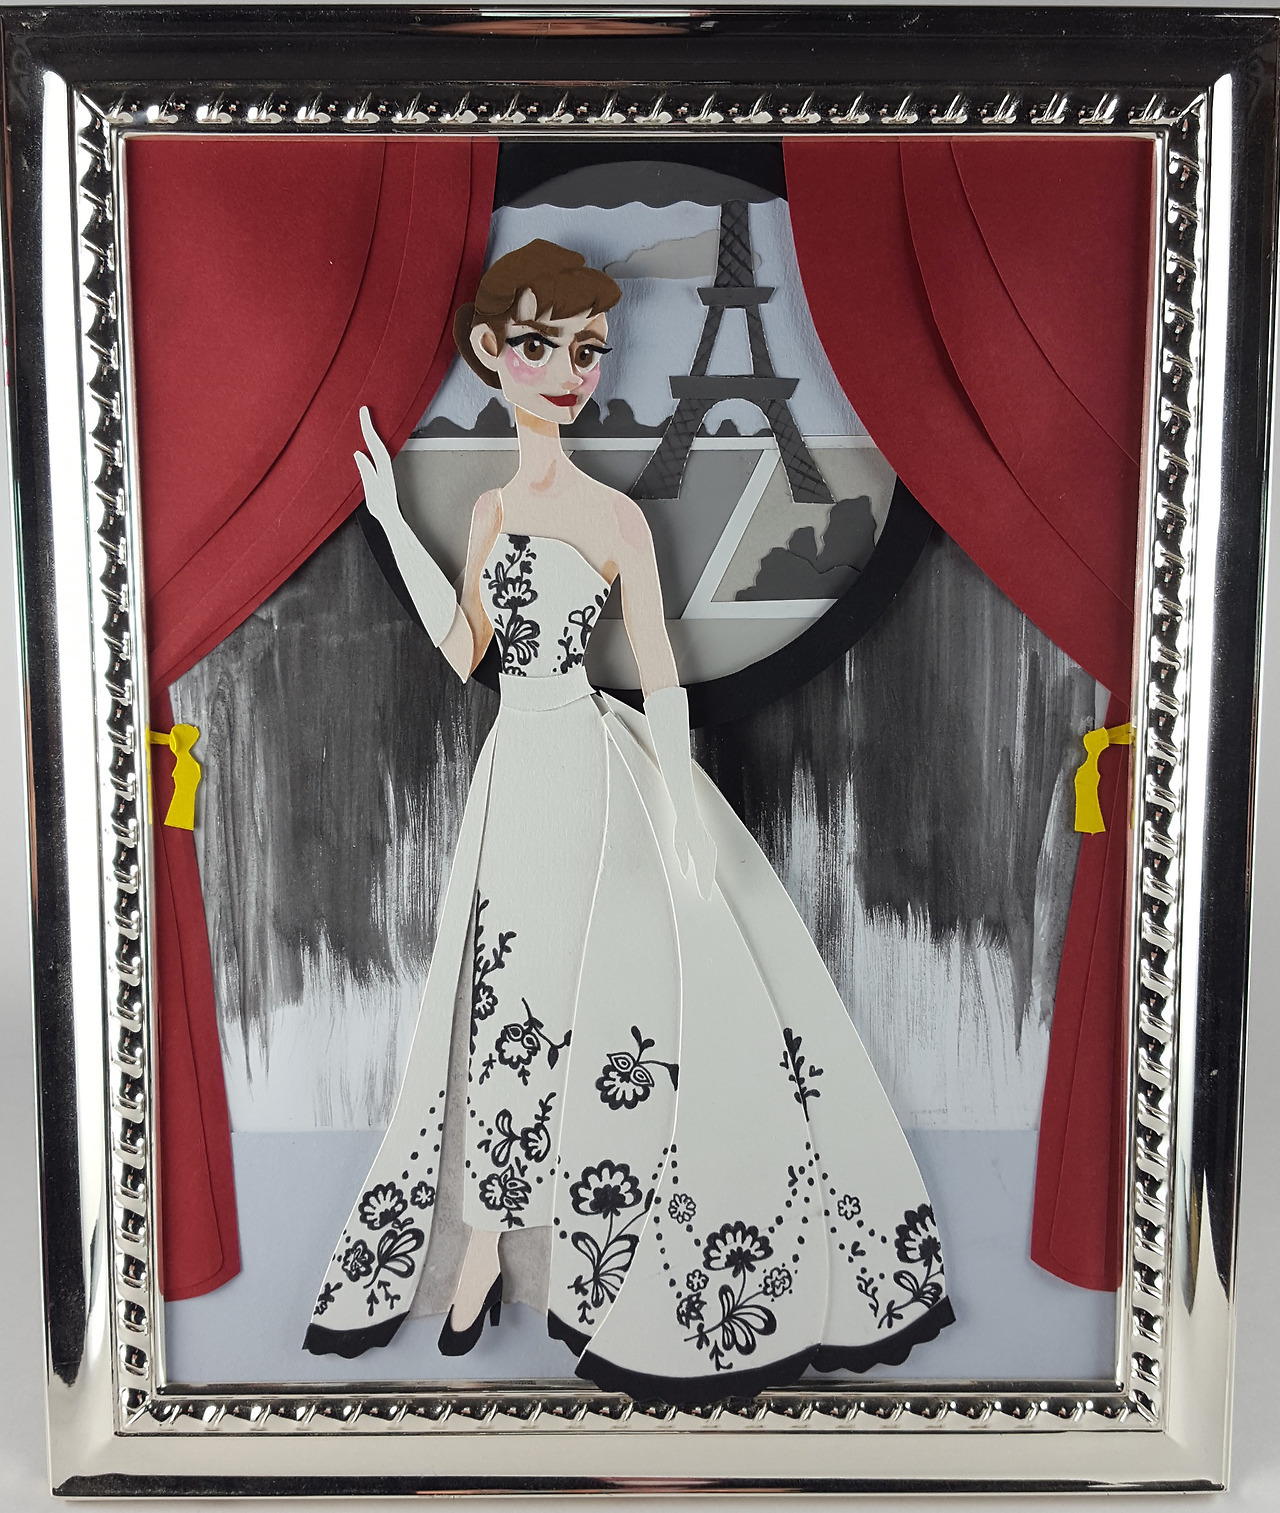 Sabrina in Paris is an illustration of Audrey Hepburn in her role as Sabrina from the 1954 film Sabrina. It shows her character in her white and black lace ball gown, which in the movie signifies her change from a shy and lovesick, invisible girl, to...